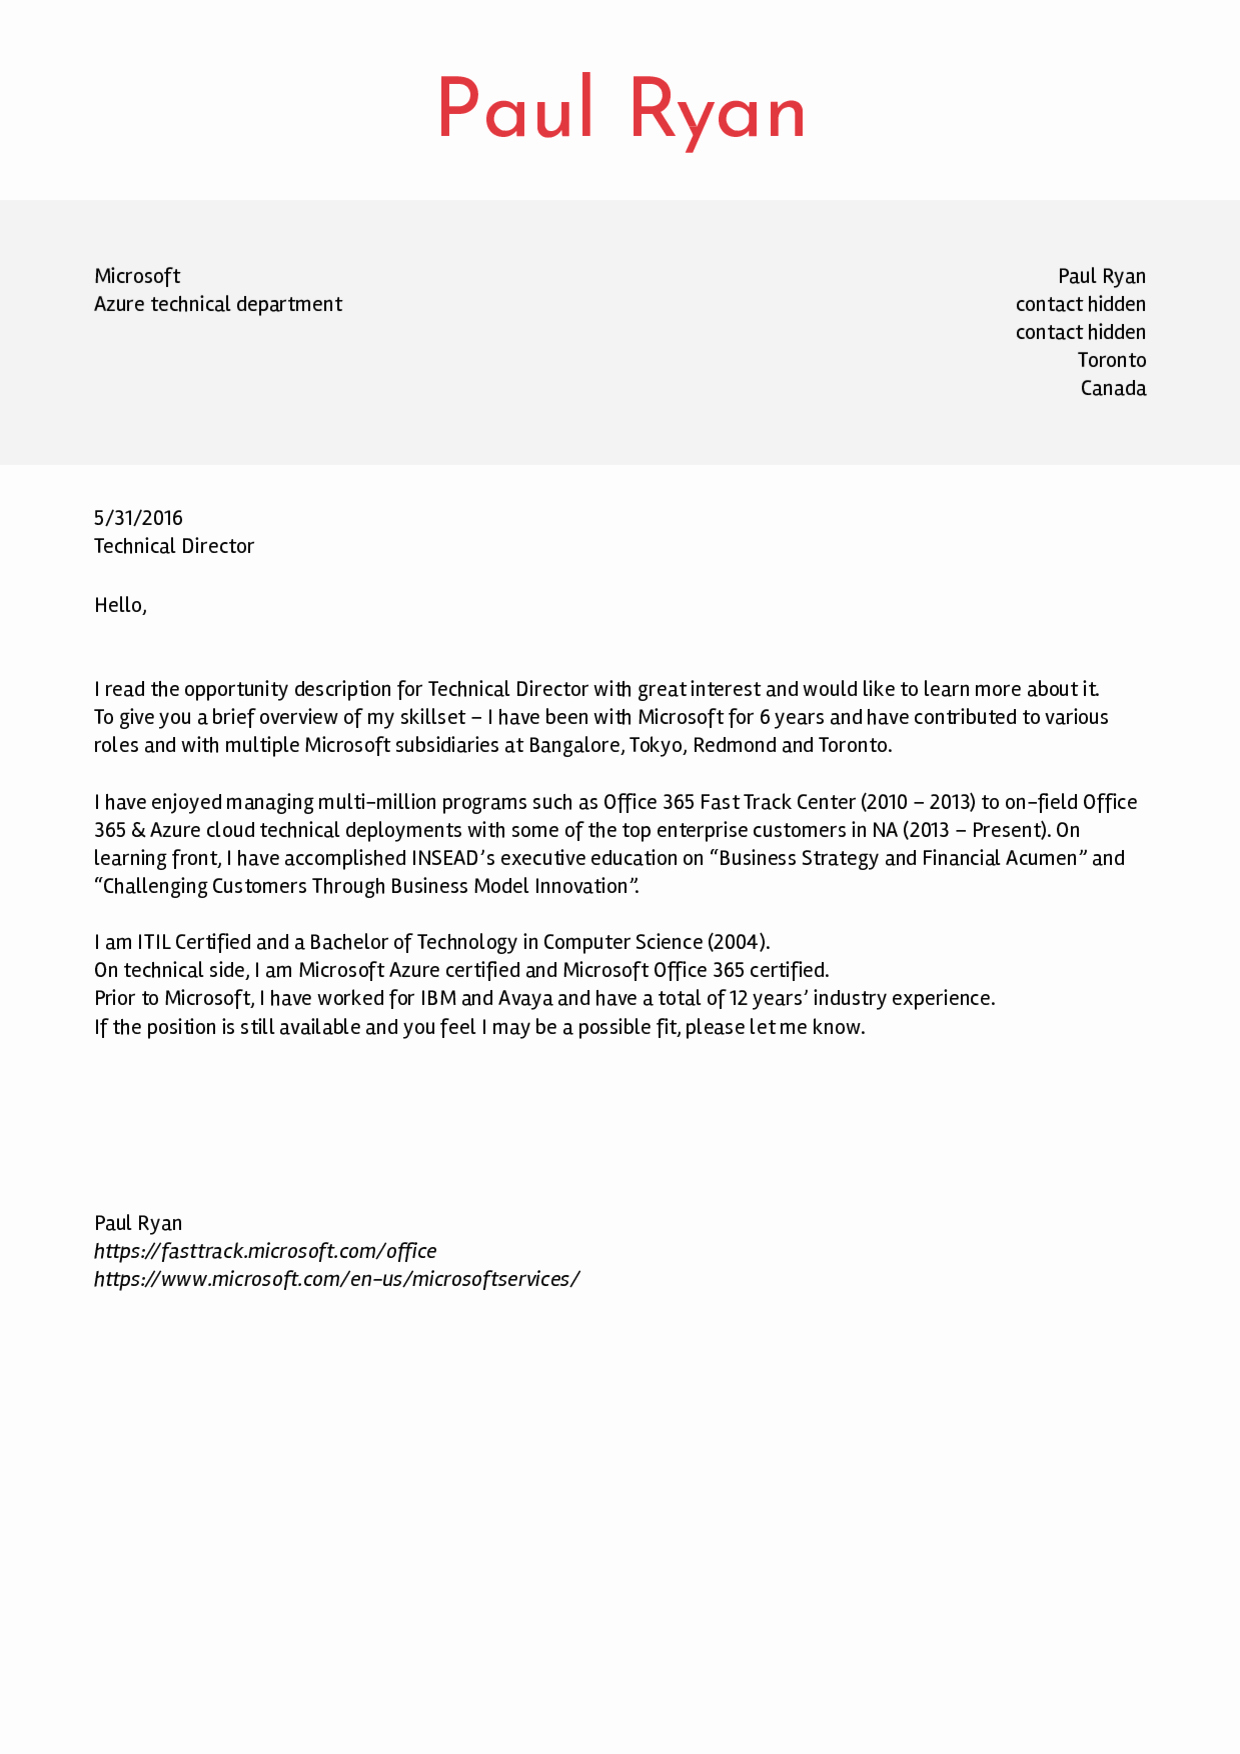 Sample Cover Letter Free Elegant Cover Letter Examples by Real People Microsoft Technical